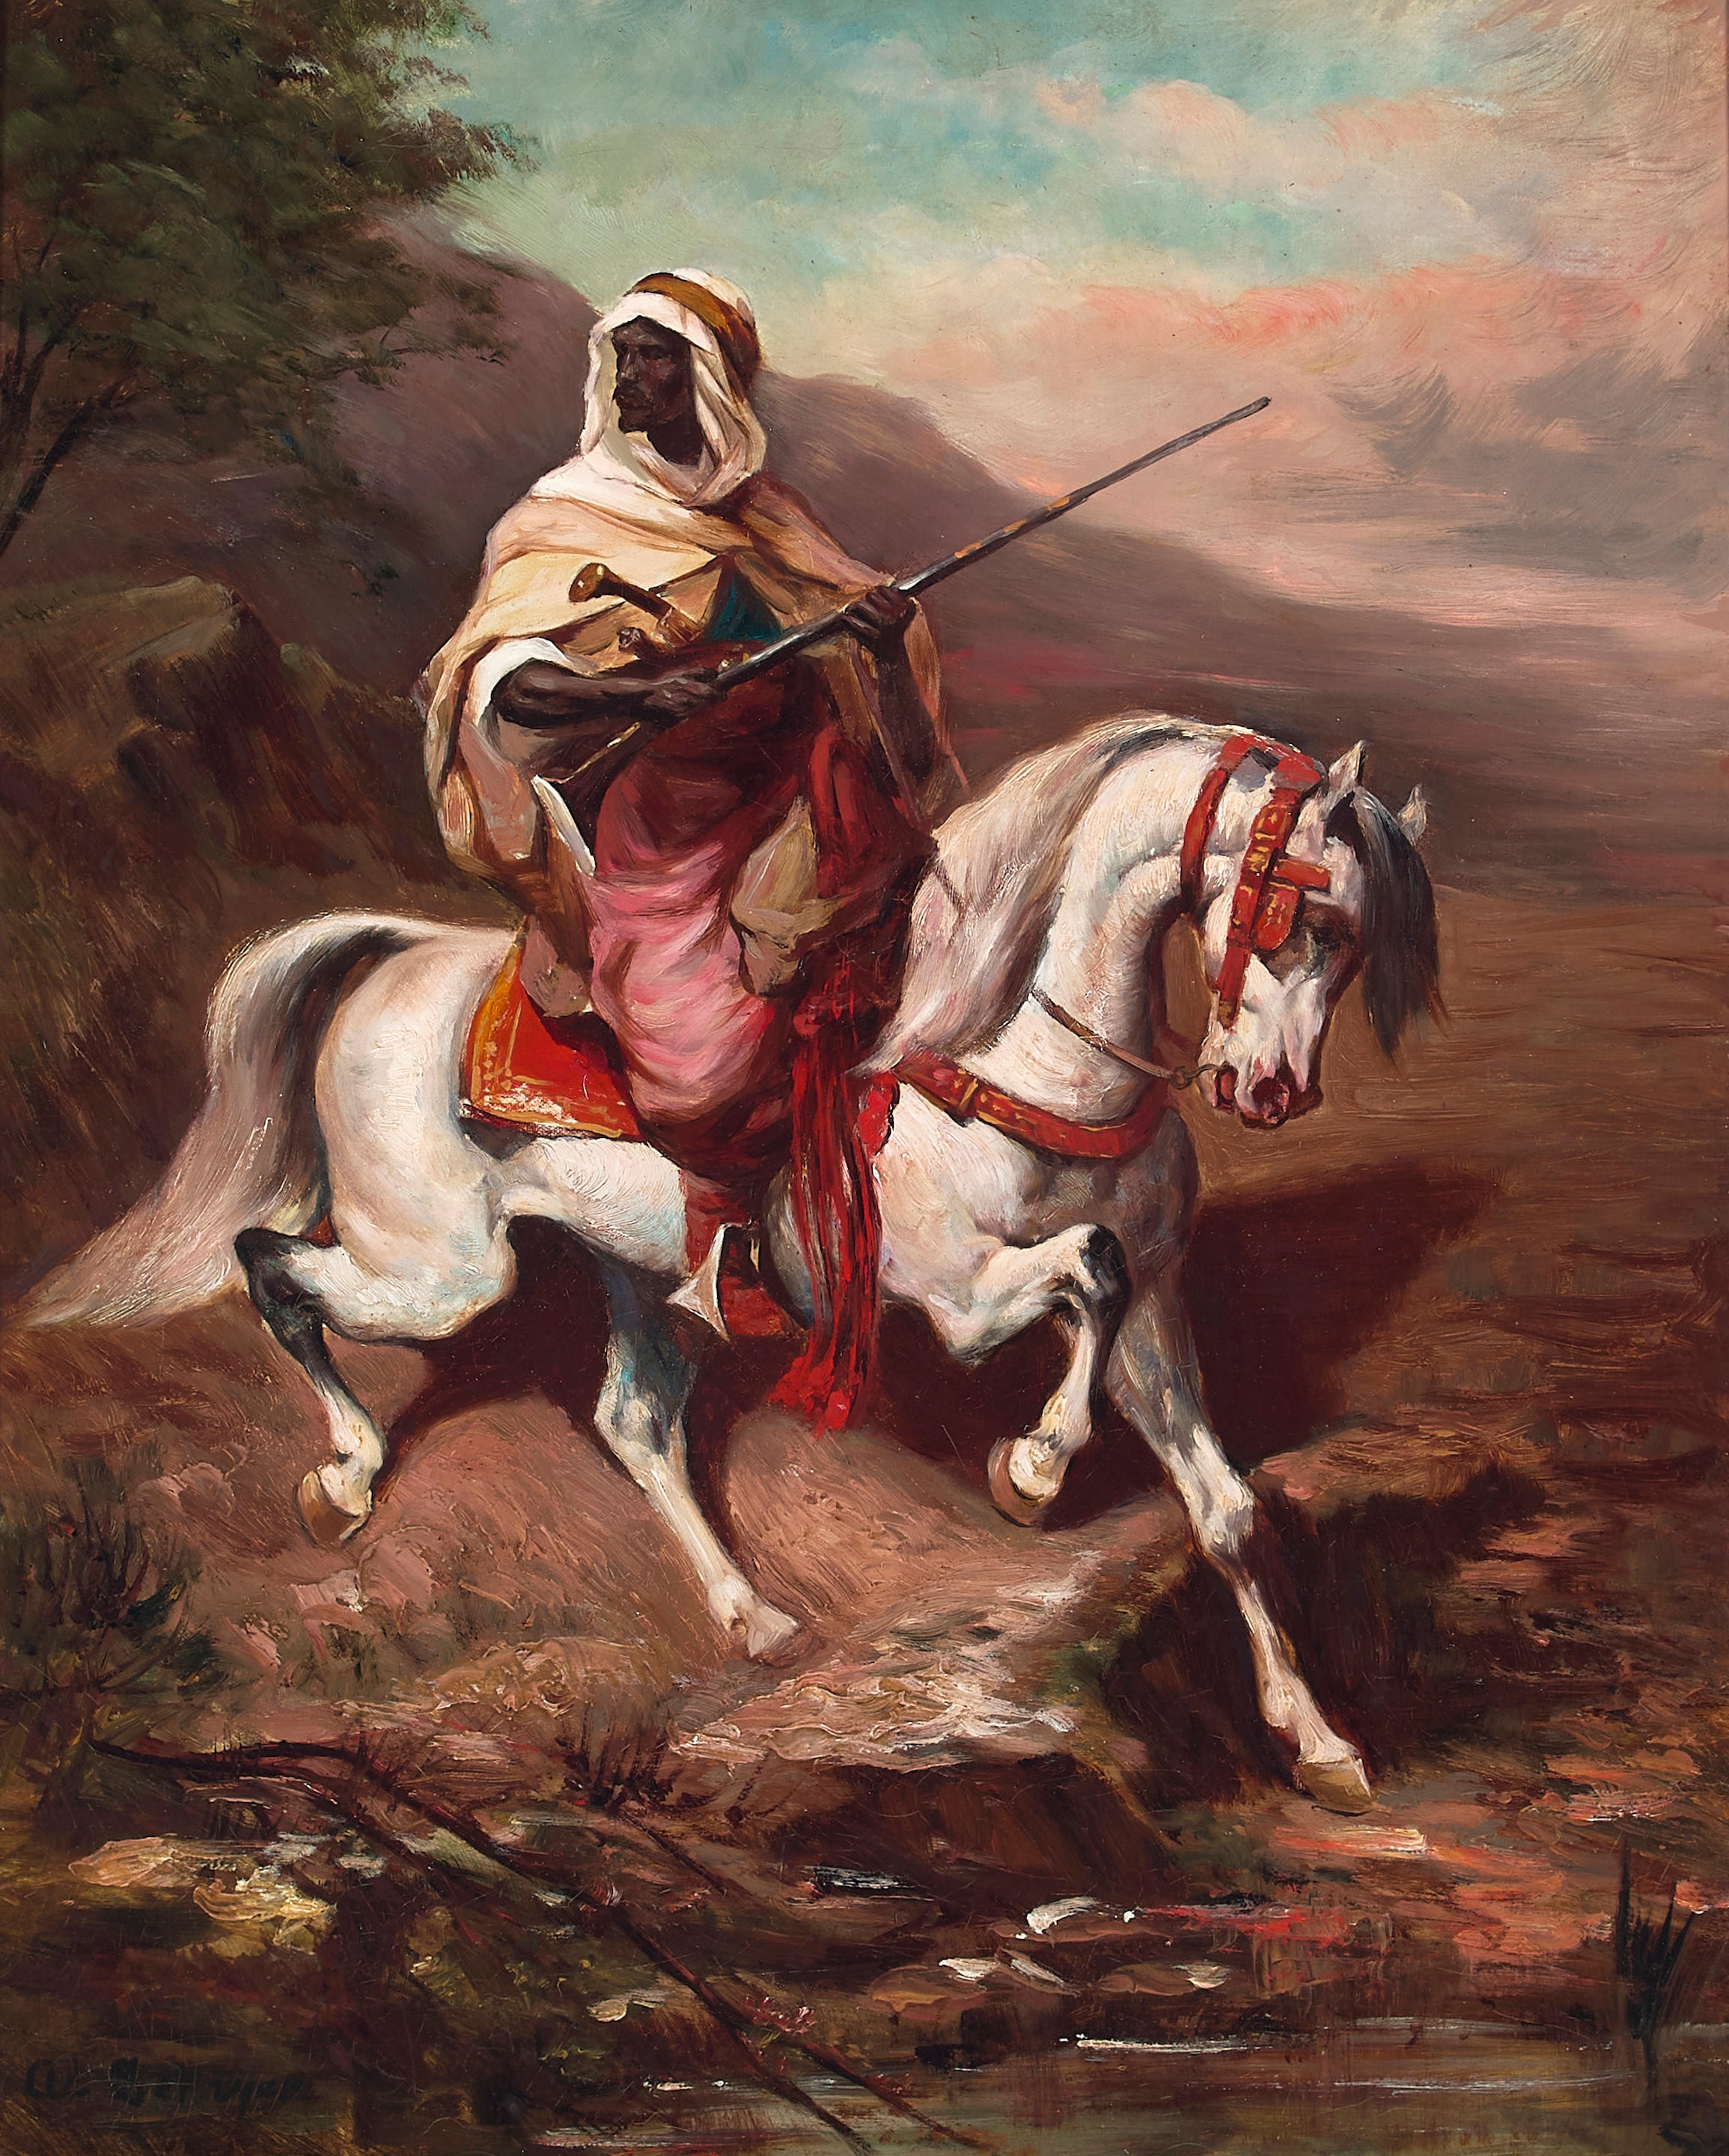 Bedouin on a white horse by Christian Adolph Schreyer